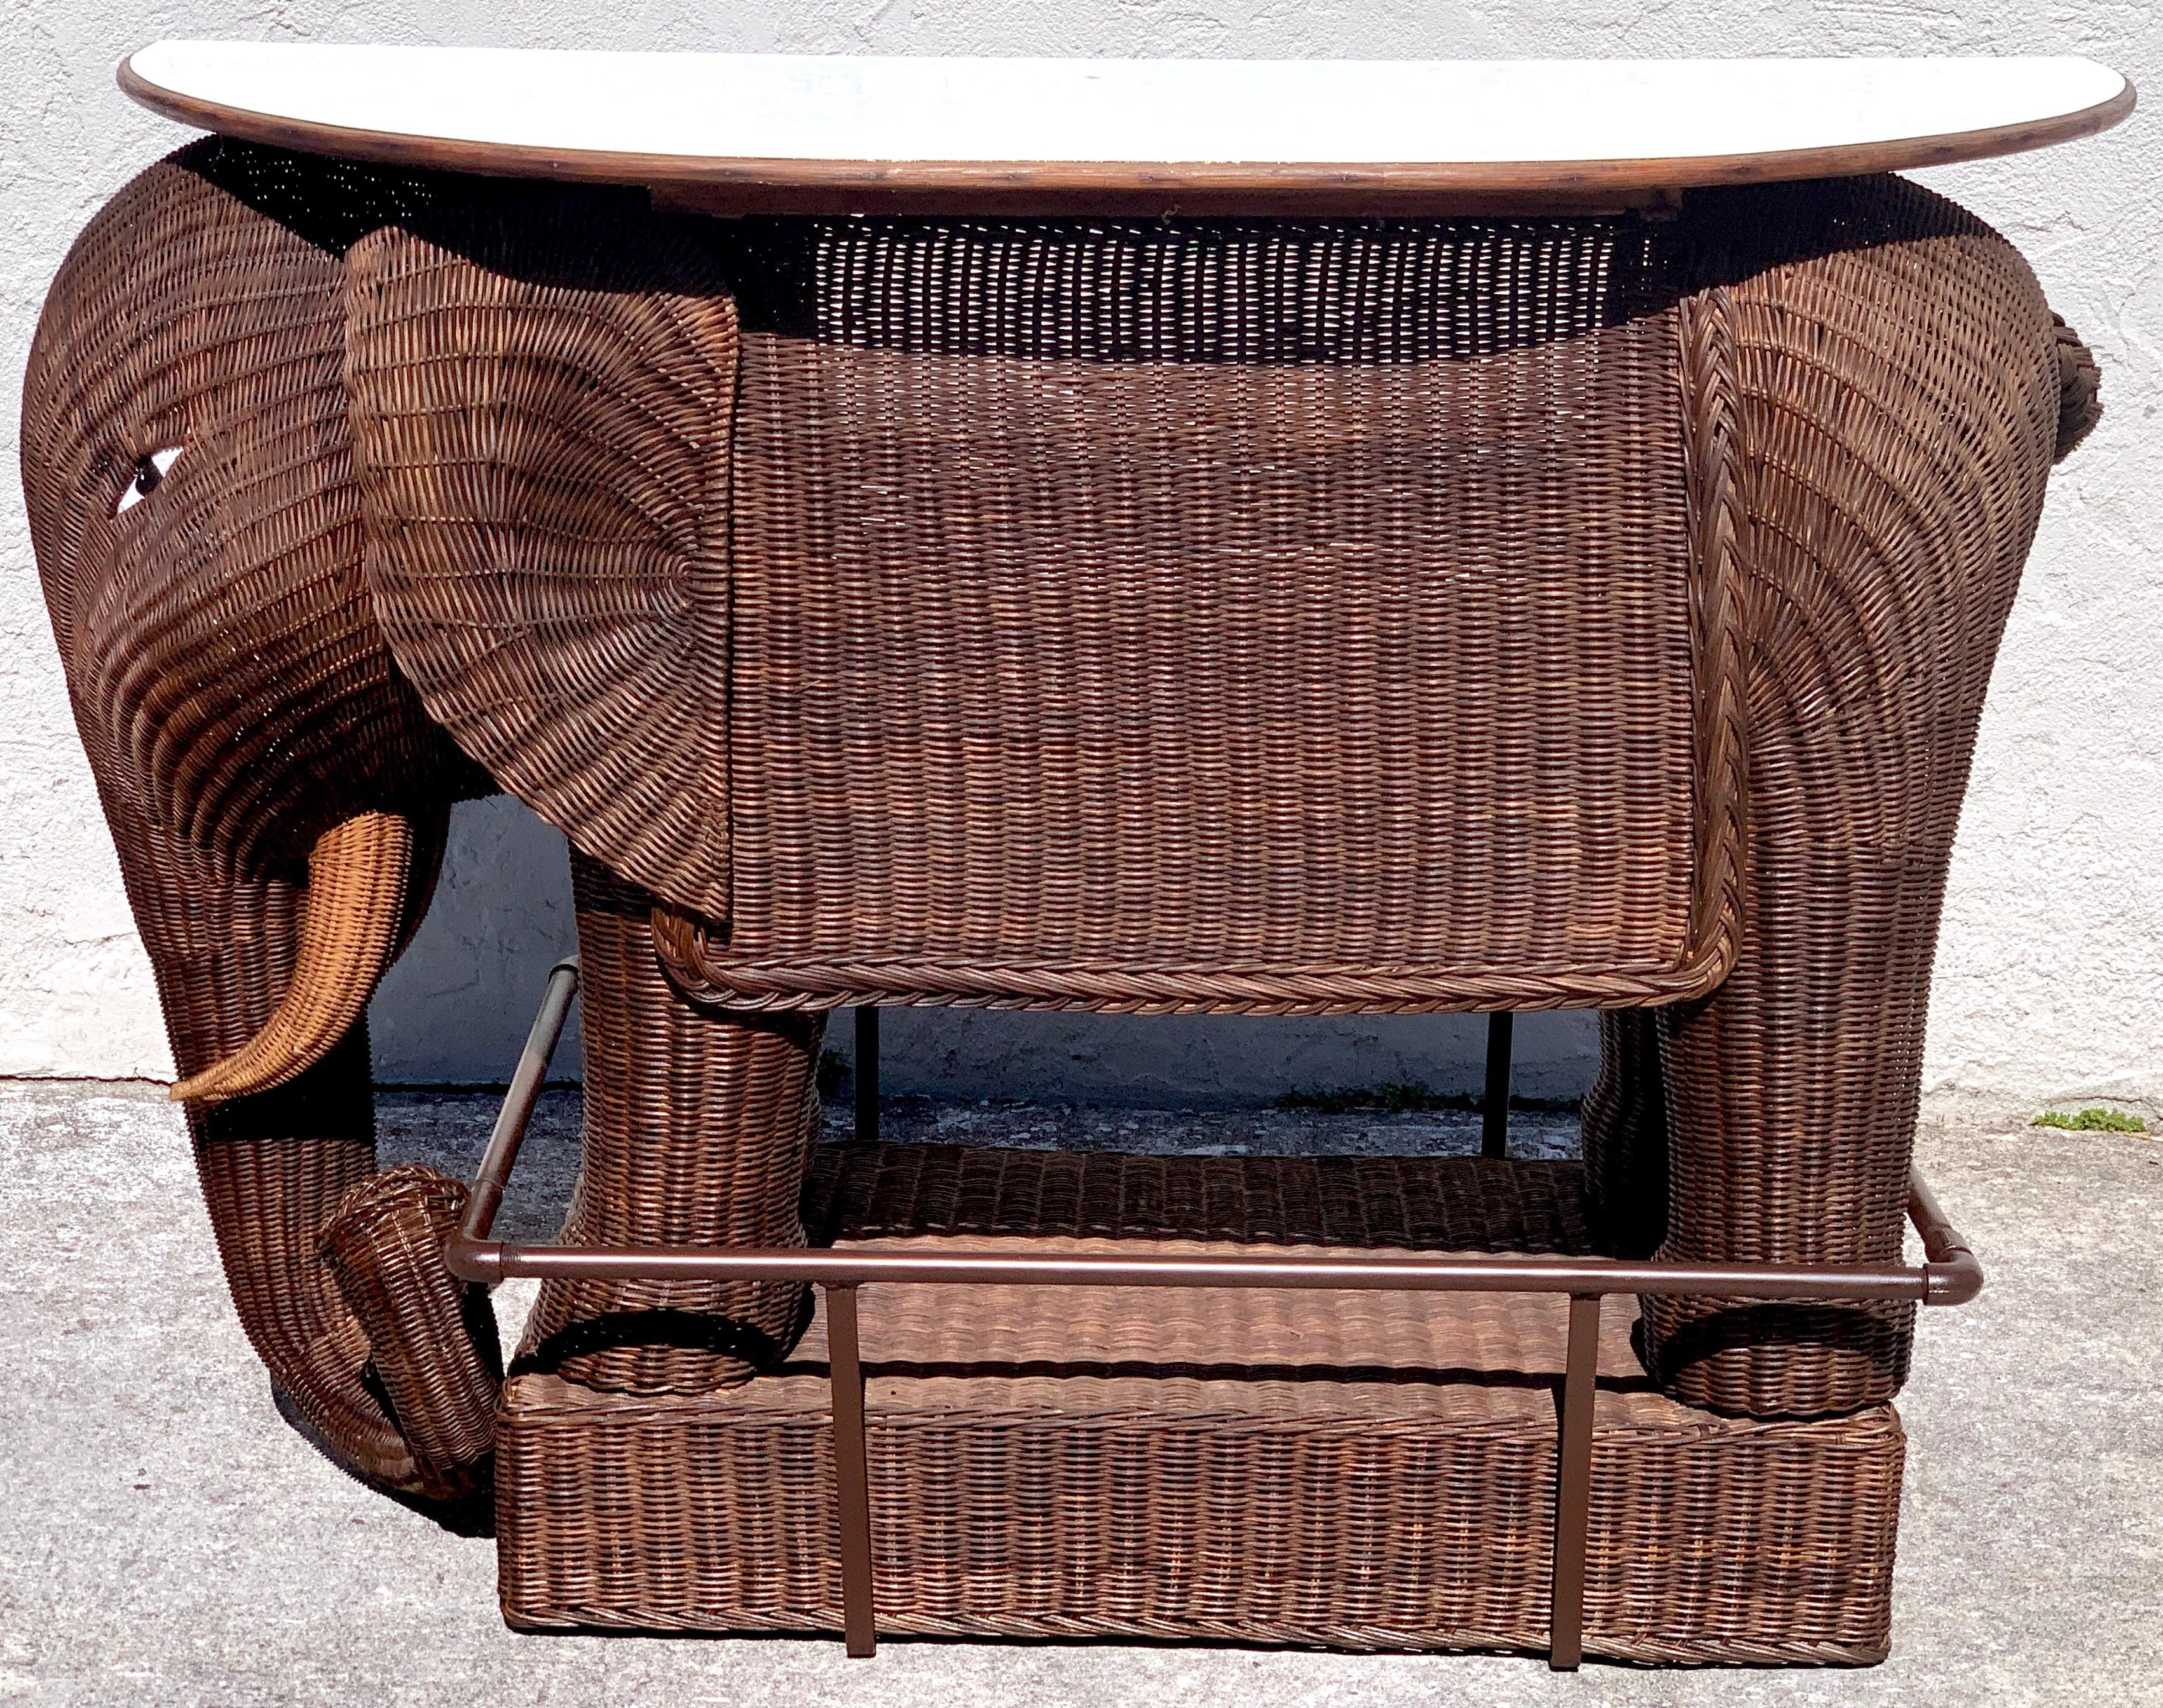 1960s Chinese export wicker elephant dry bar, a rare and wonderful, fully functional dry bar. Of typical form with a 54